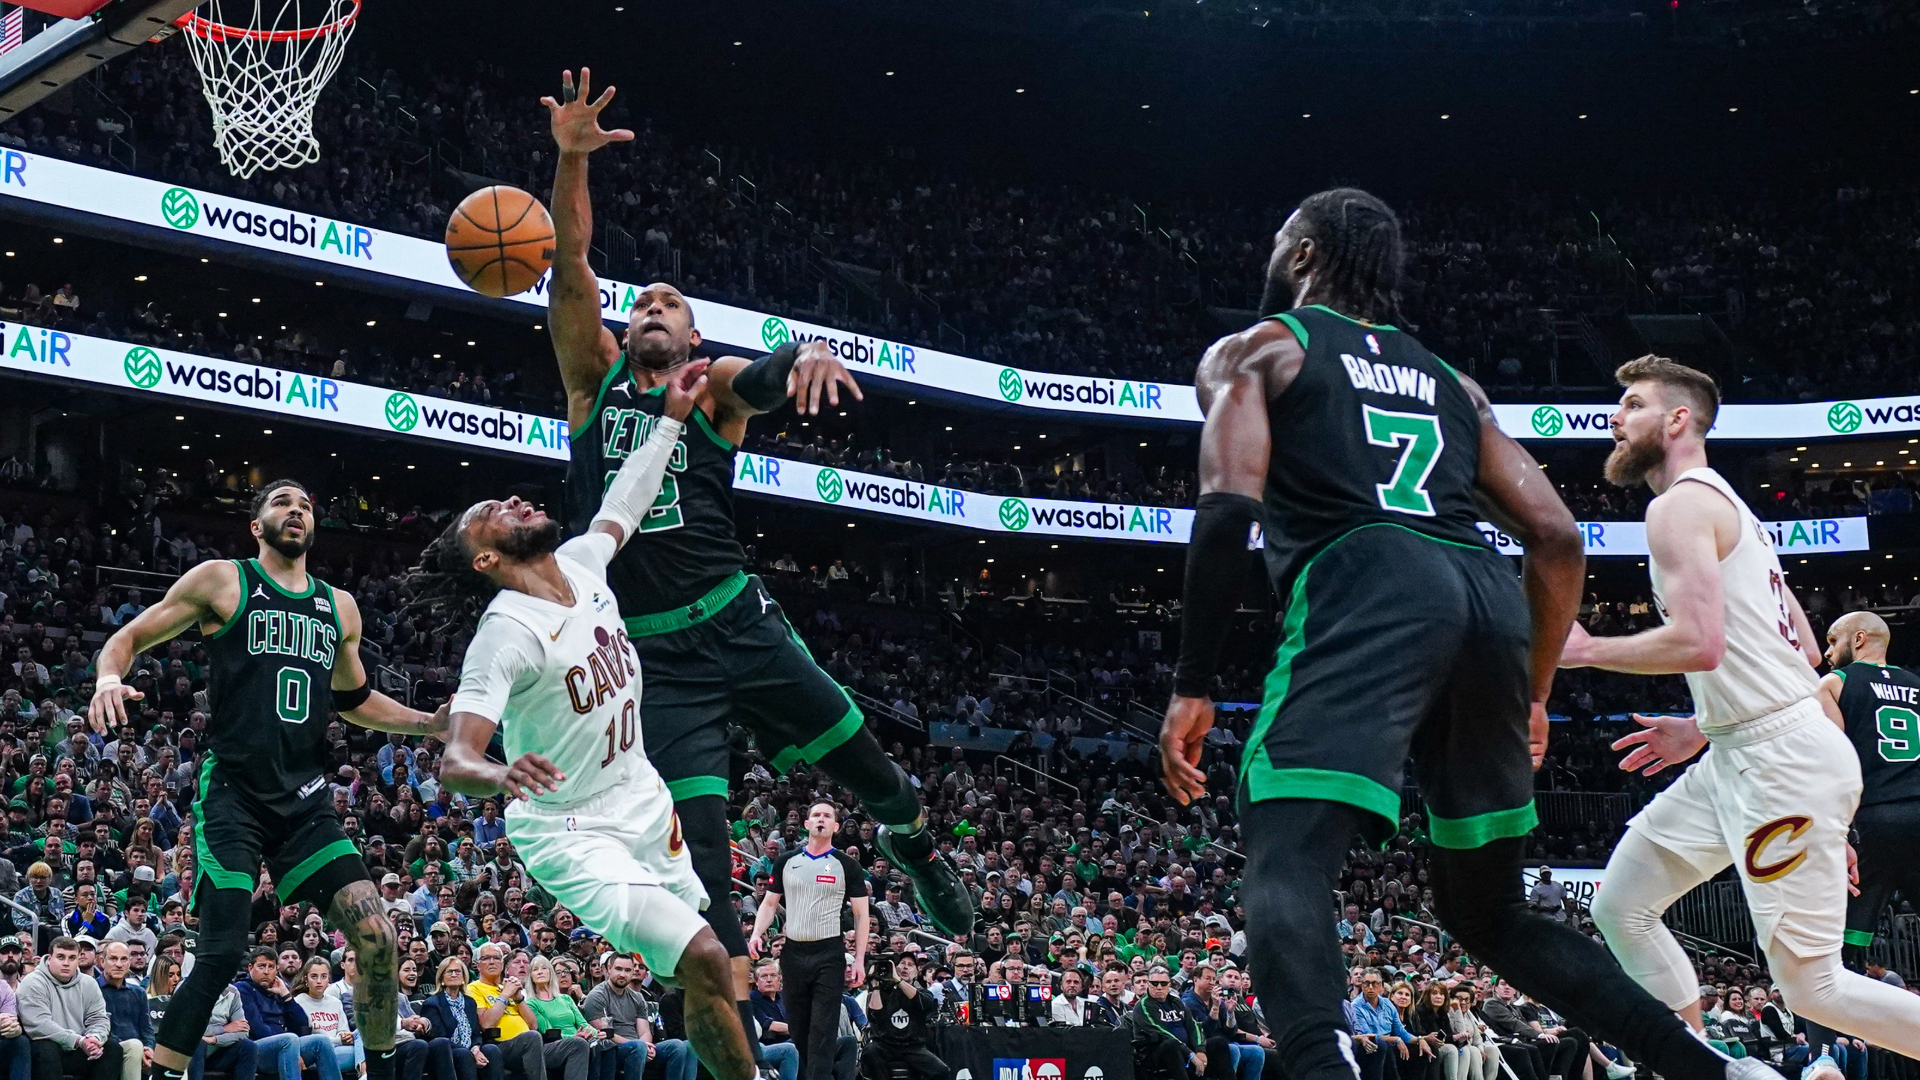 Celtics ‘Grateful’ For ‘Gift’ Of Early Playoff Series End Vs.
Cavaliers